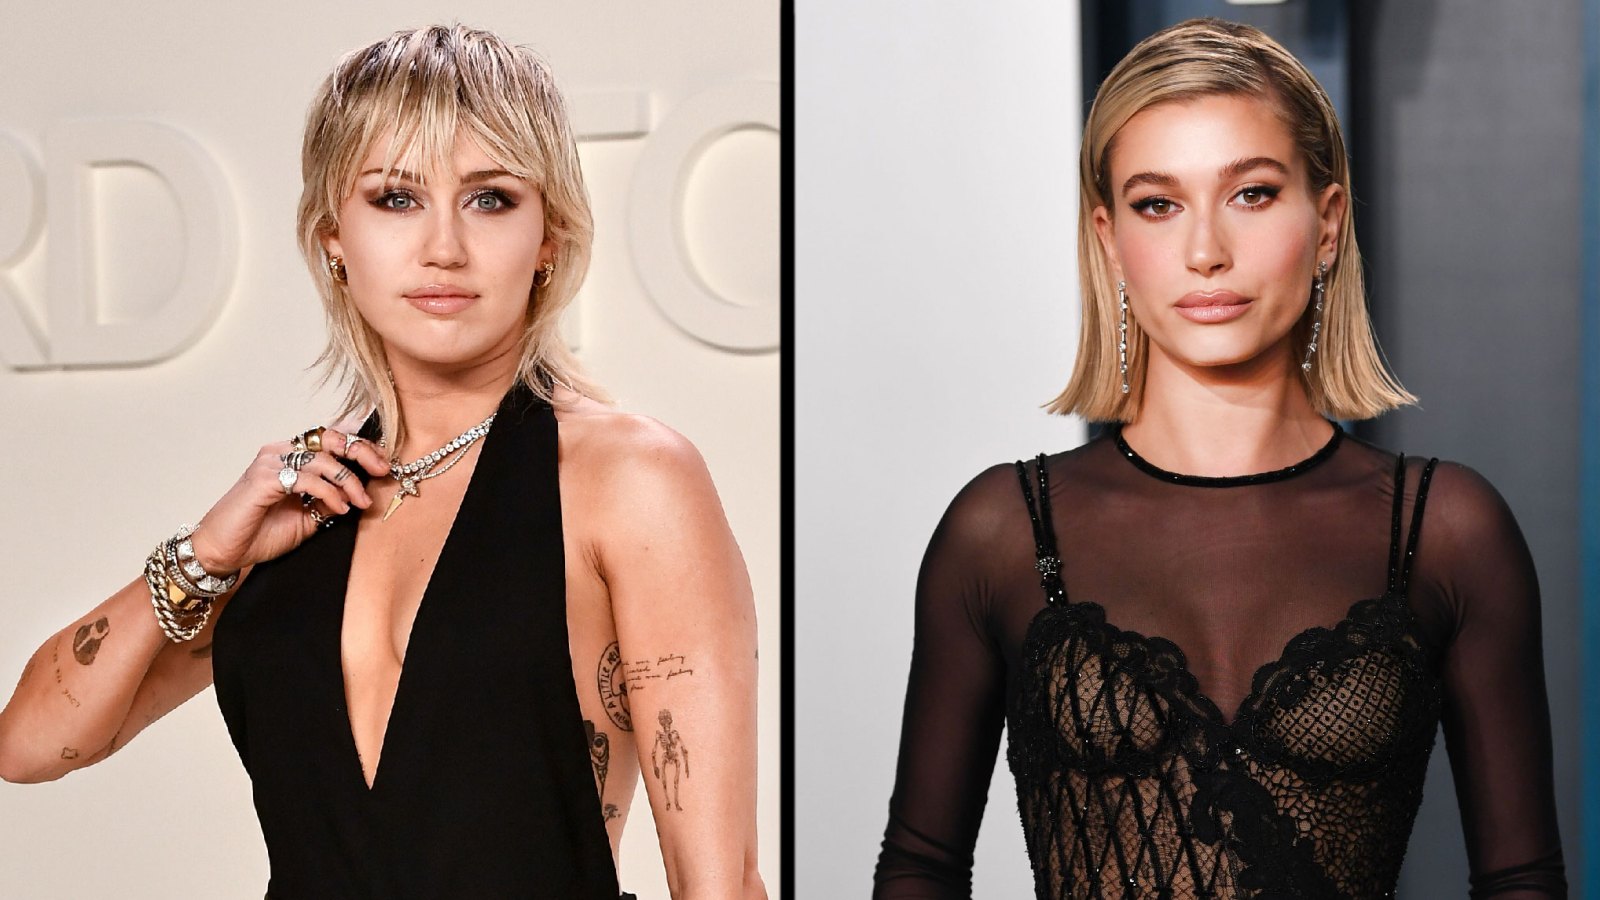 Miley Cyrus Explains to Hailey Bieber Why She Left the Church: 'My Gay Friends Weren't Accepted in School'